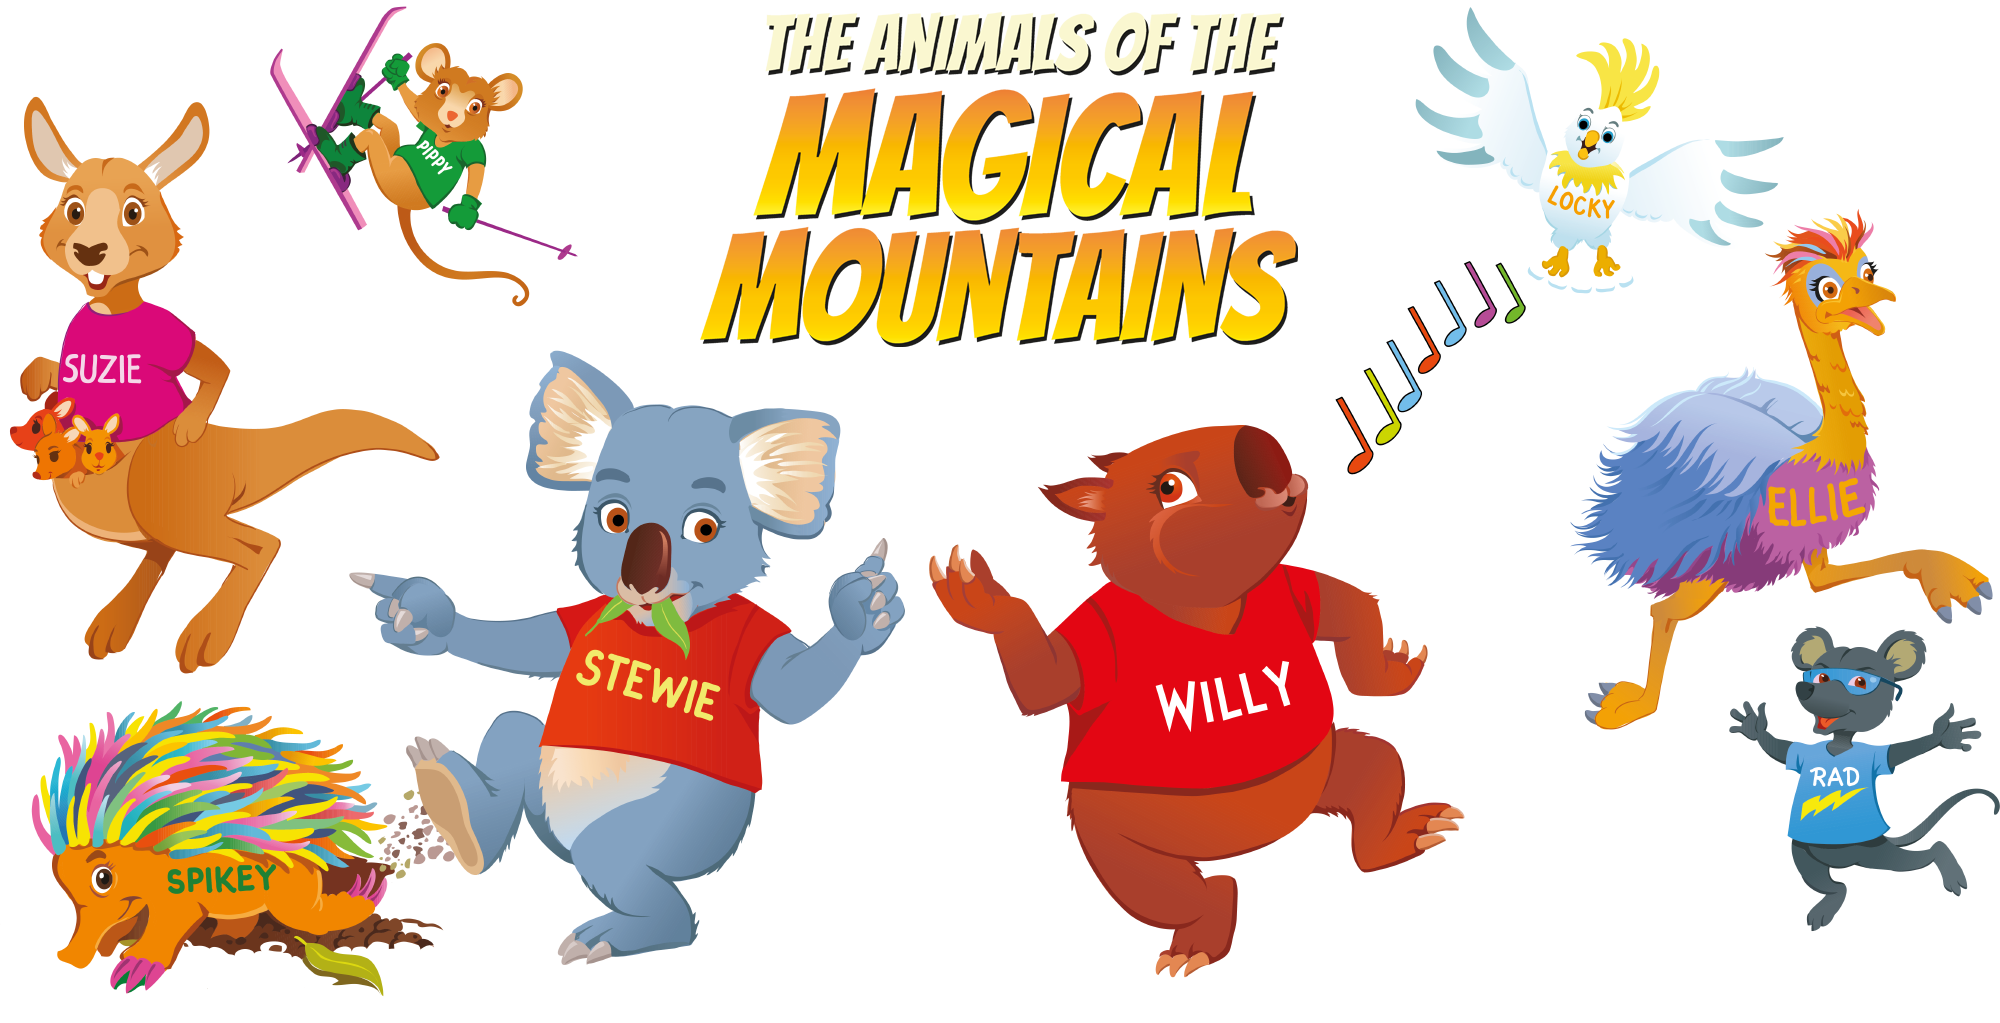 The Animals of The Magical Mountains